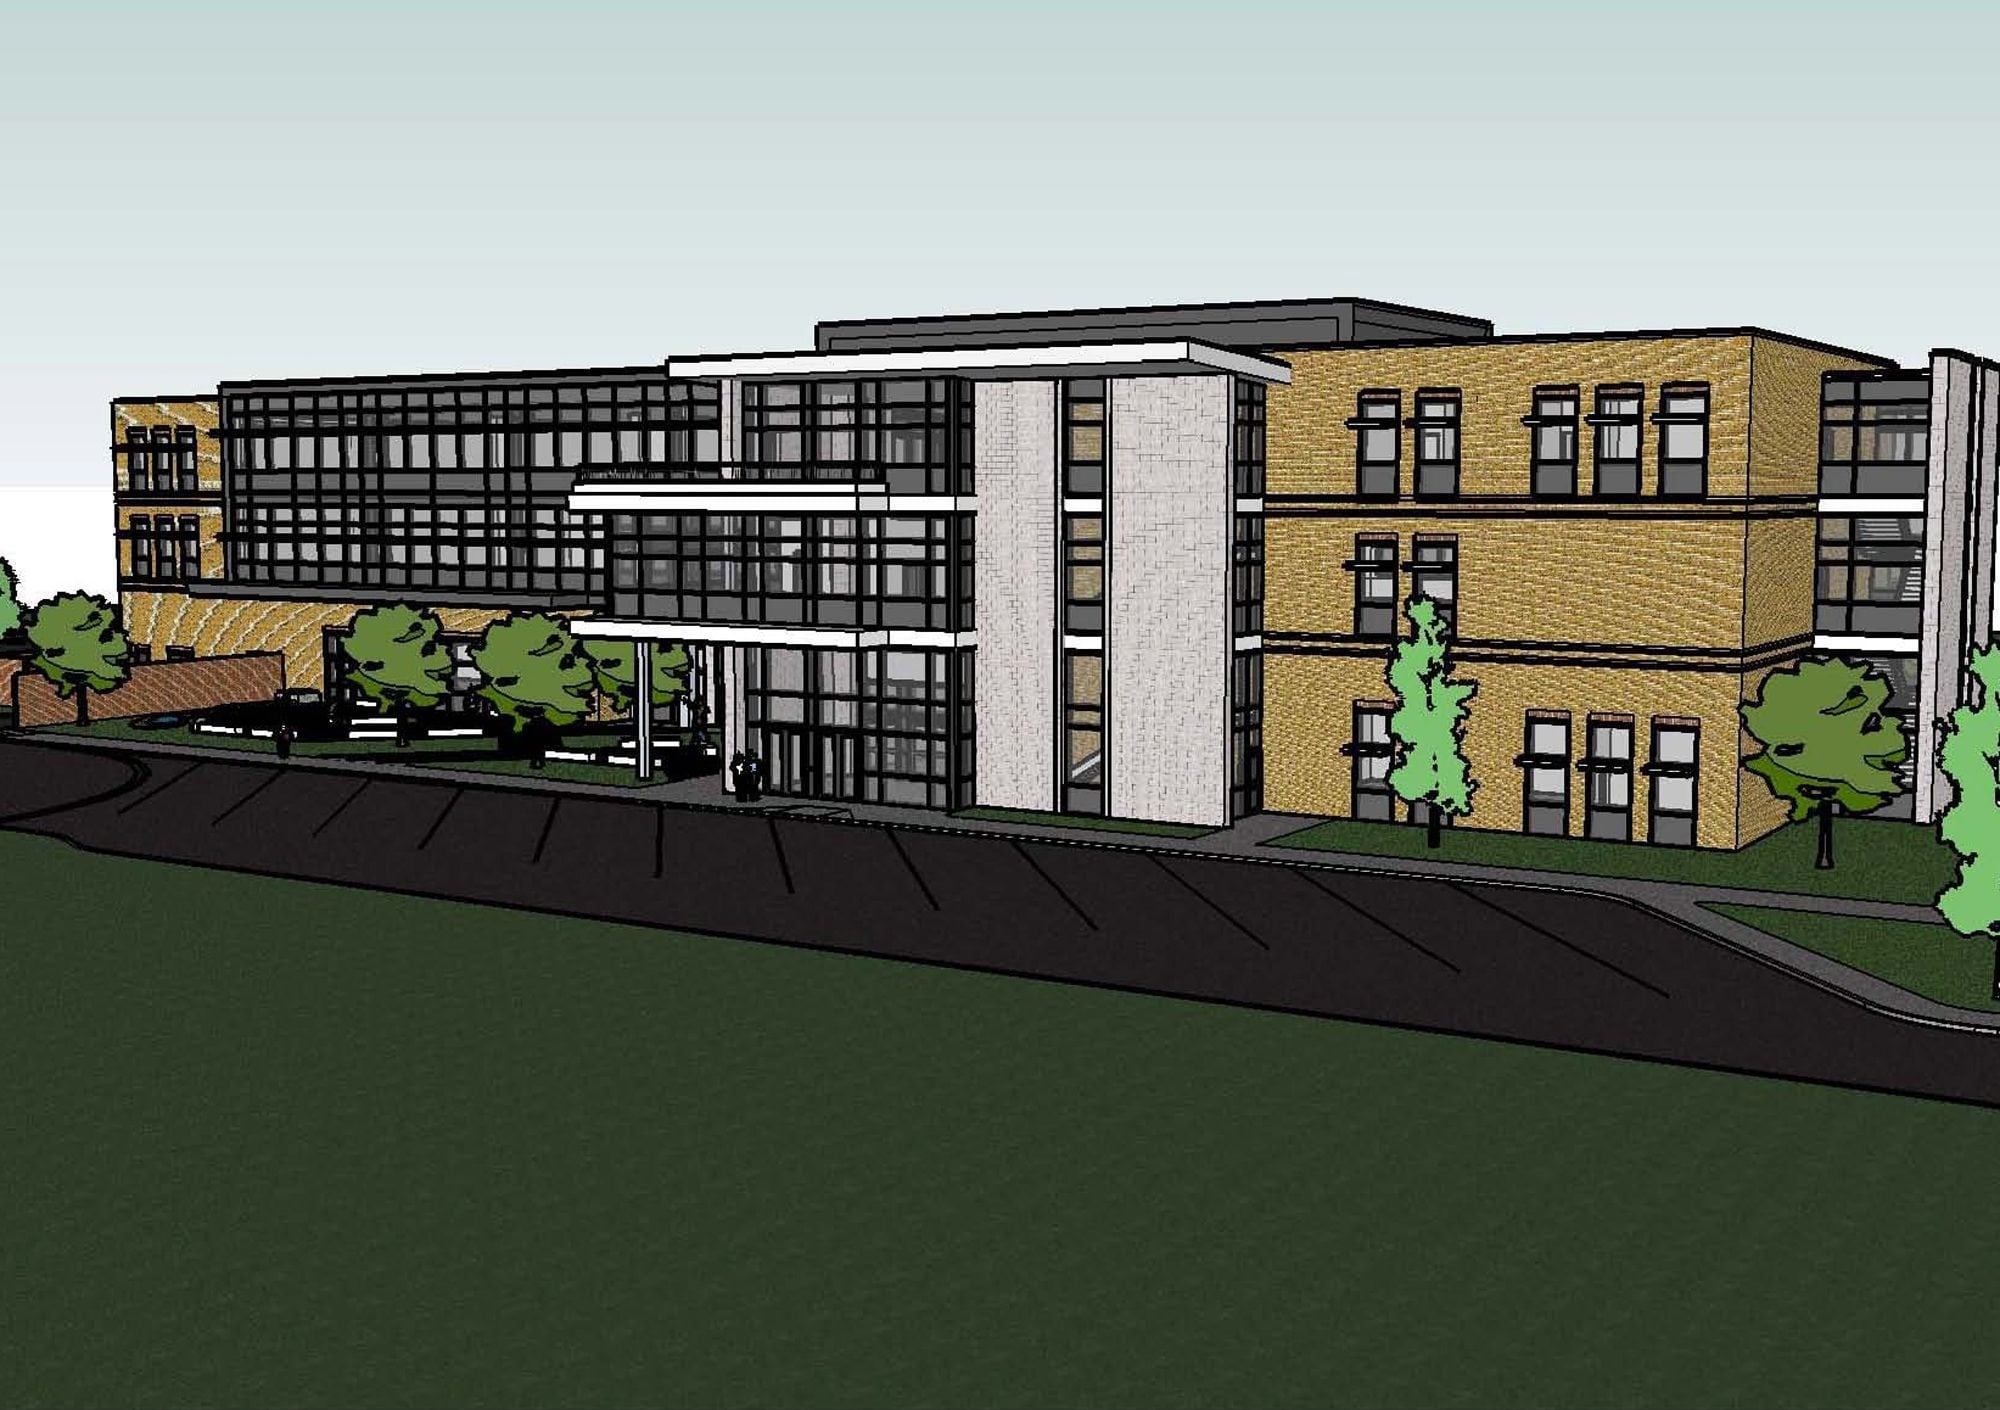 Evergreen Public Schools' new Health and BioScience Academy will serve 500 high-school students at full capacity. It will be adjacent to Southwest Washington Medical Center.